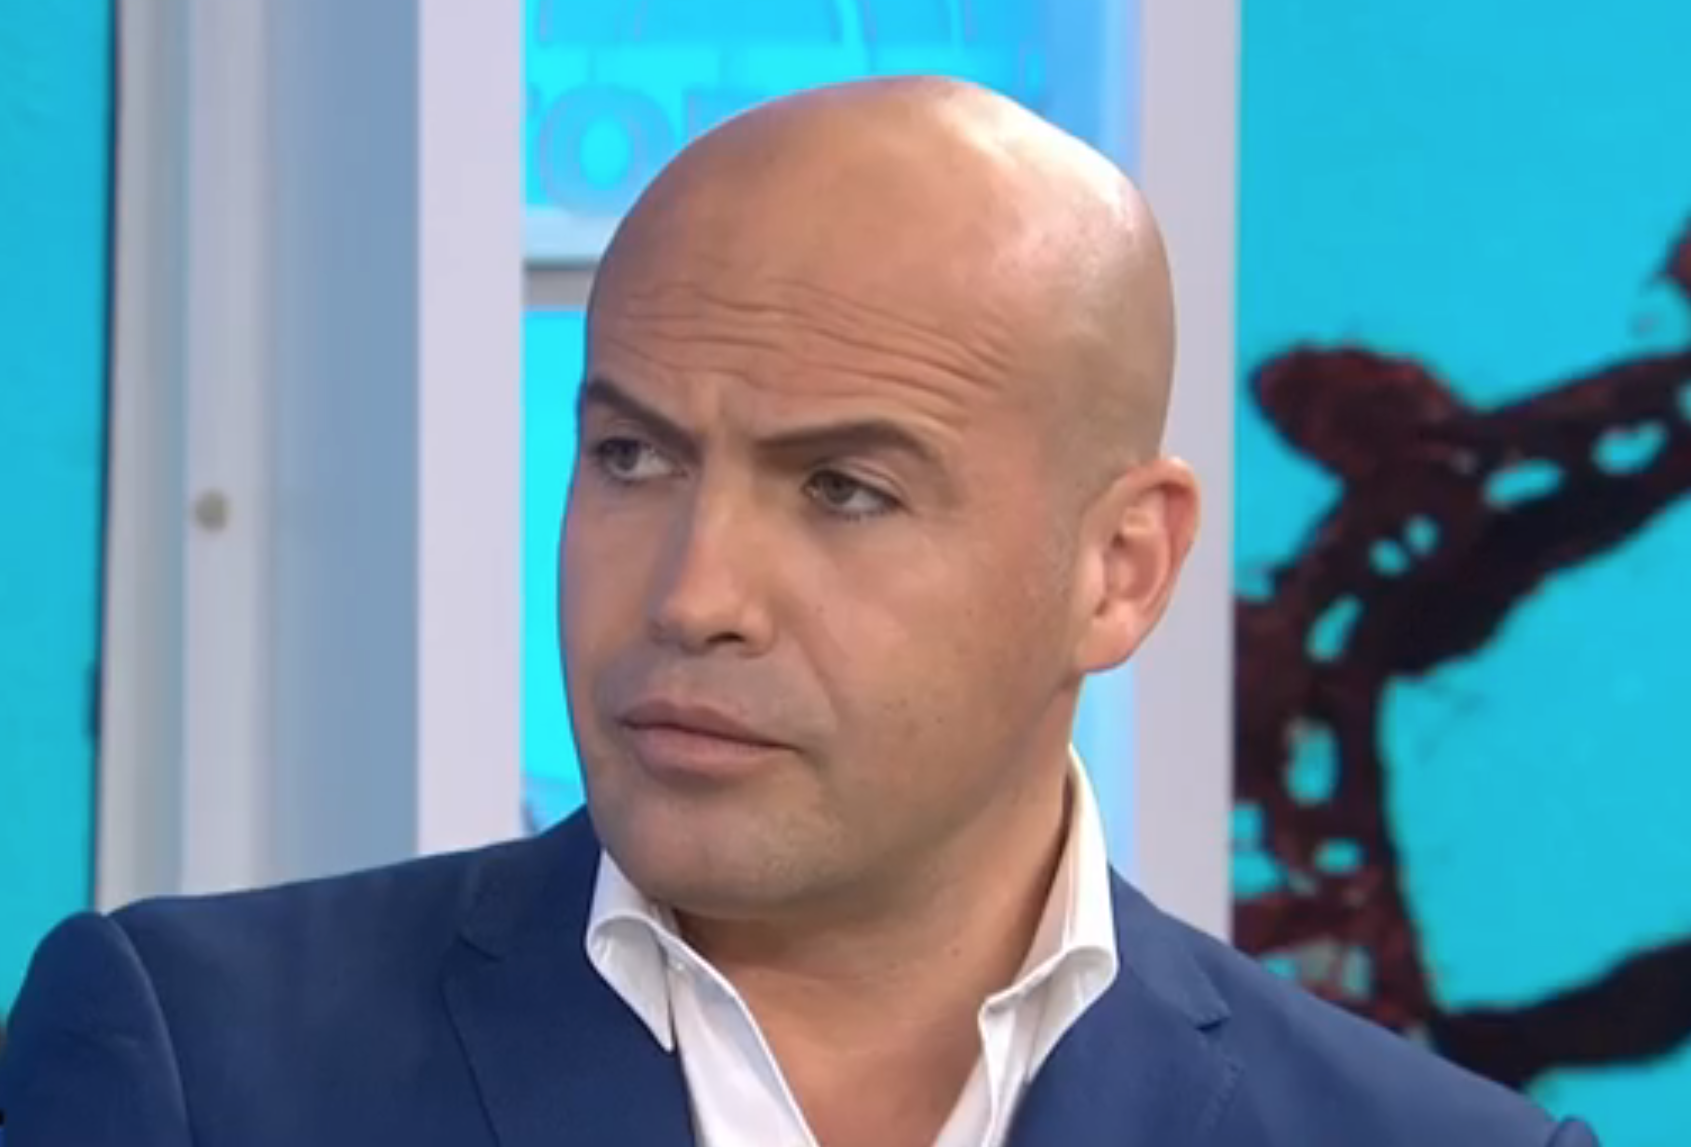 Watch Billy Zane look annoyed when asked about 'Titanic' on 'Today' - Chicago Tribune1691 x 1147